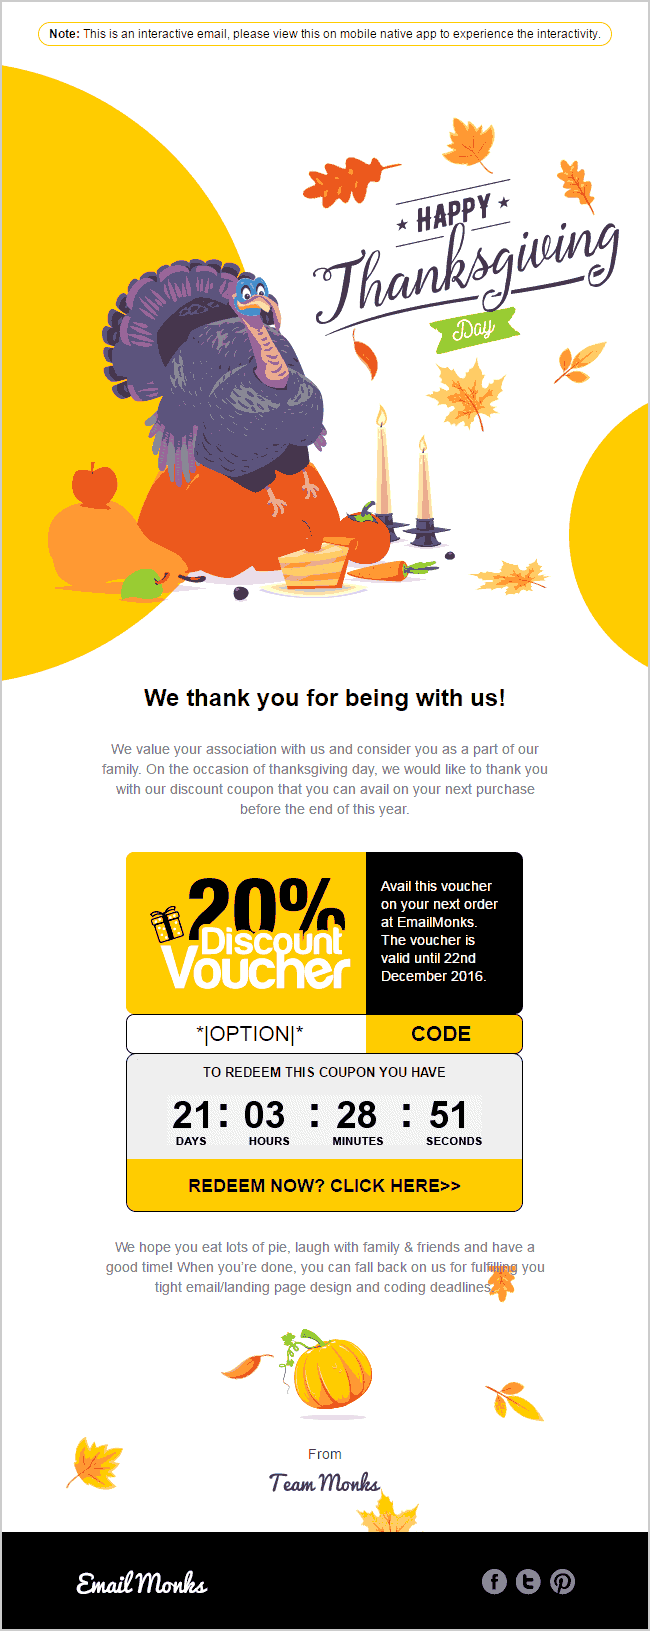 EmailMonks_thanksgiving email